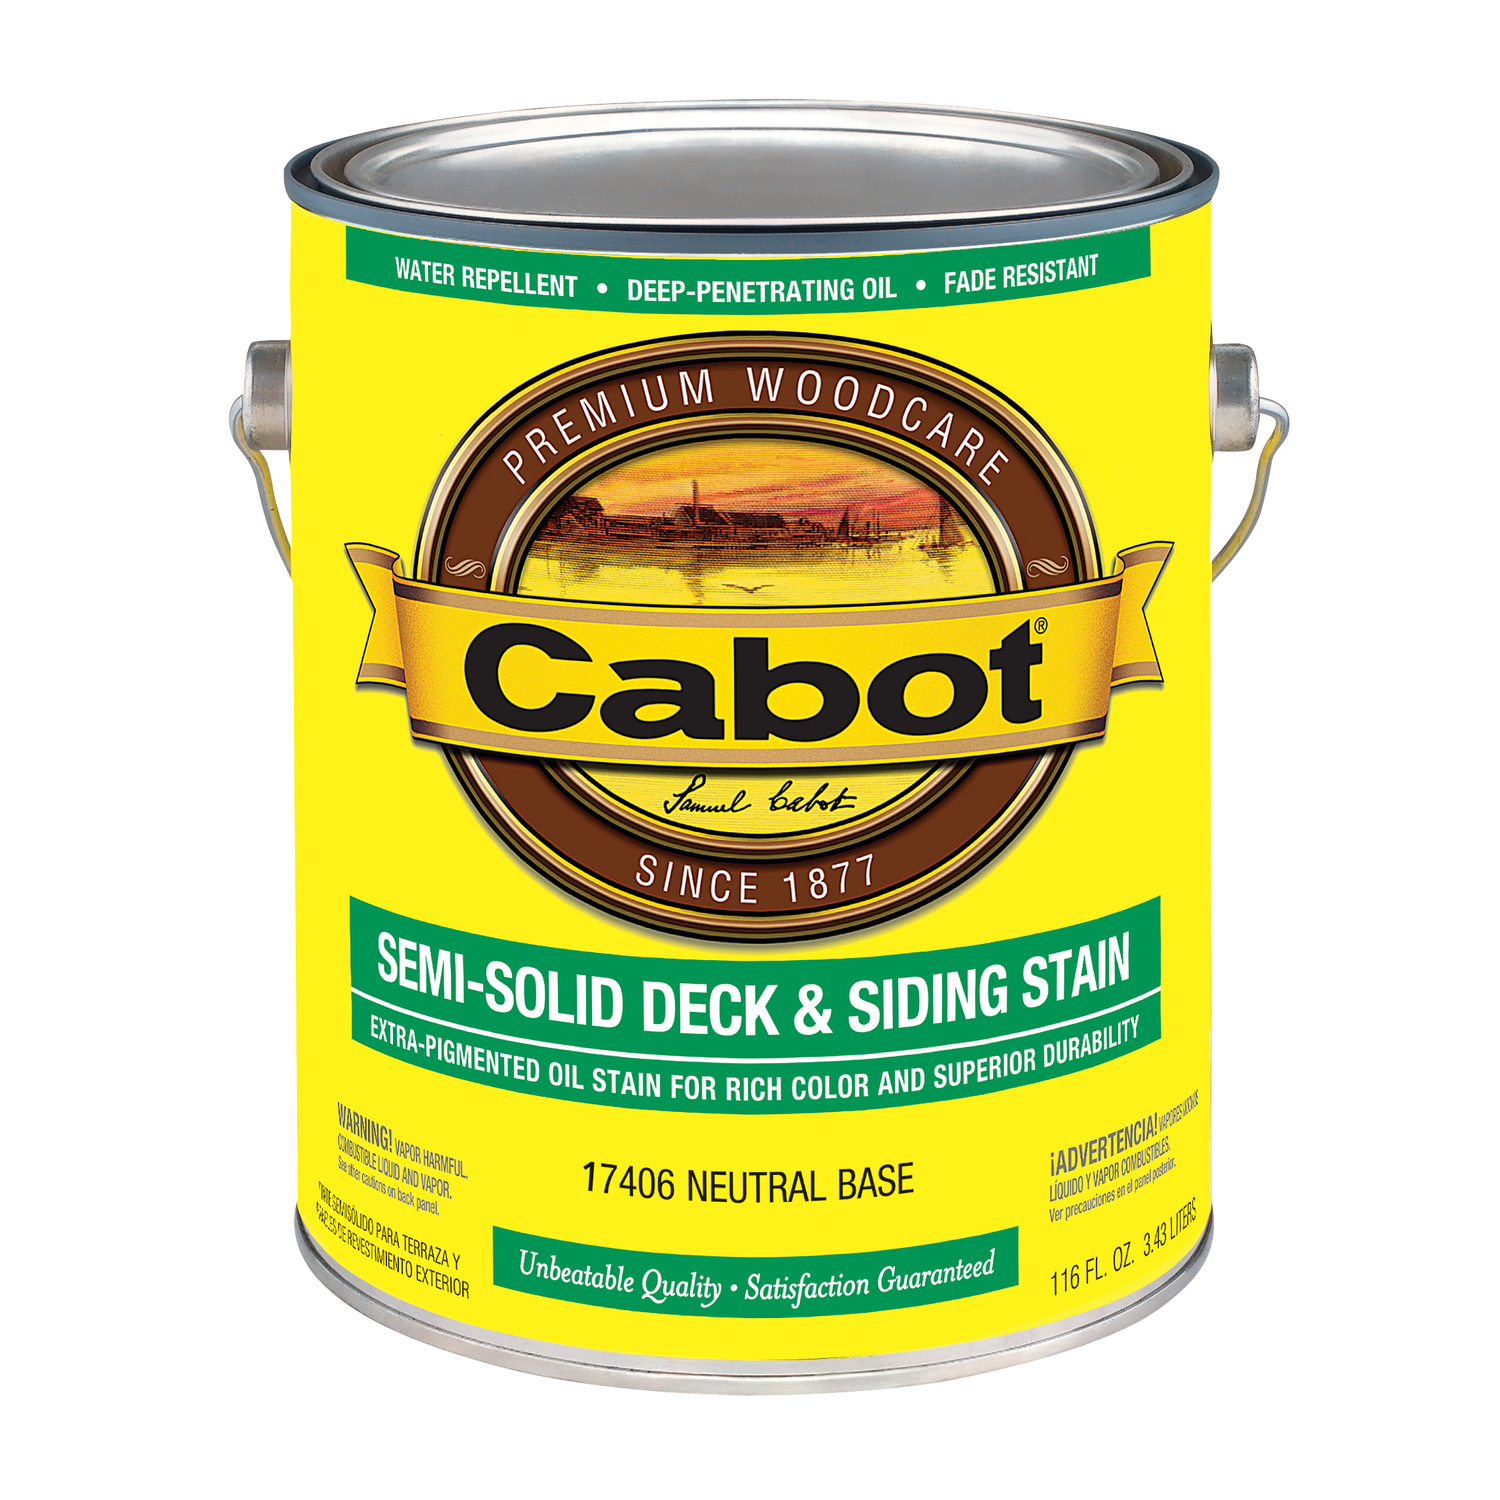 Cabot Semi-Solid Low VOC Semi-Solid Tintable Neutral Base Deck and Siding Stain 1 gal